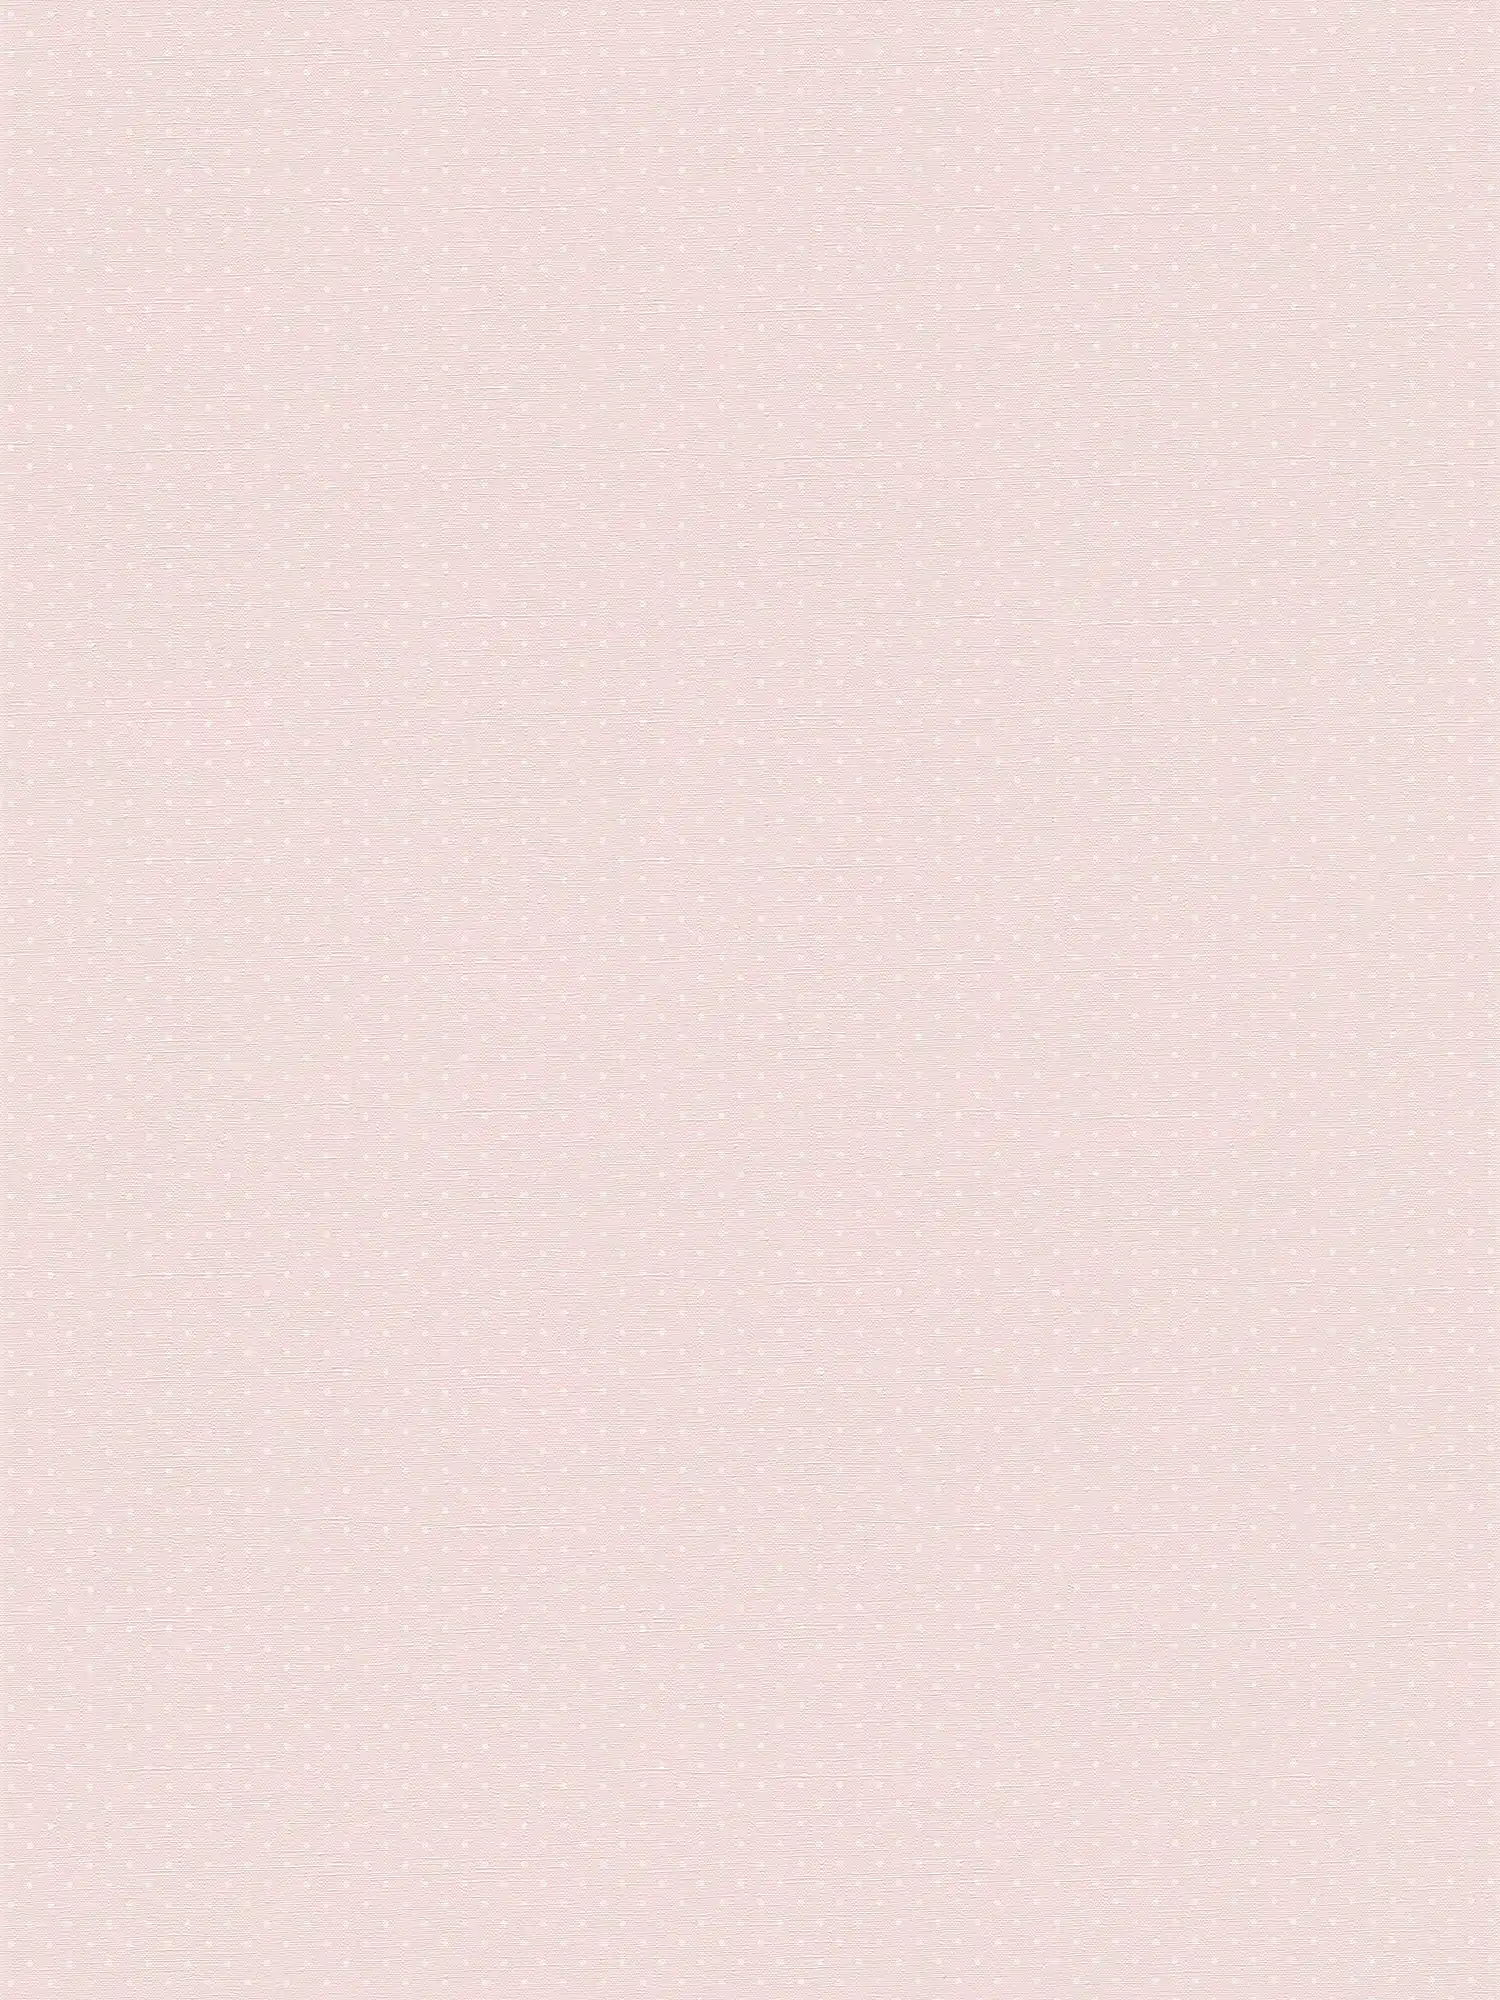 Country style wallpaper with small dots - pink, white
